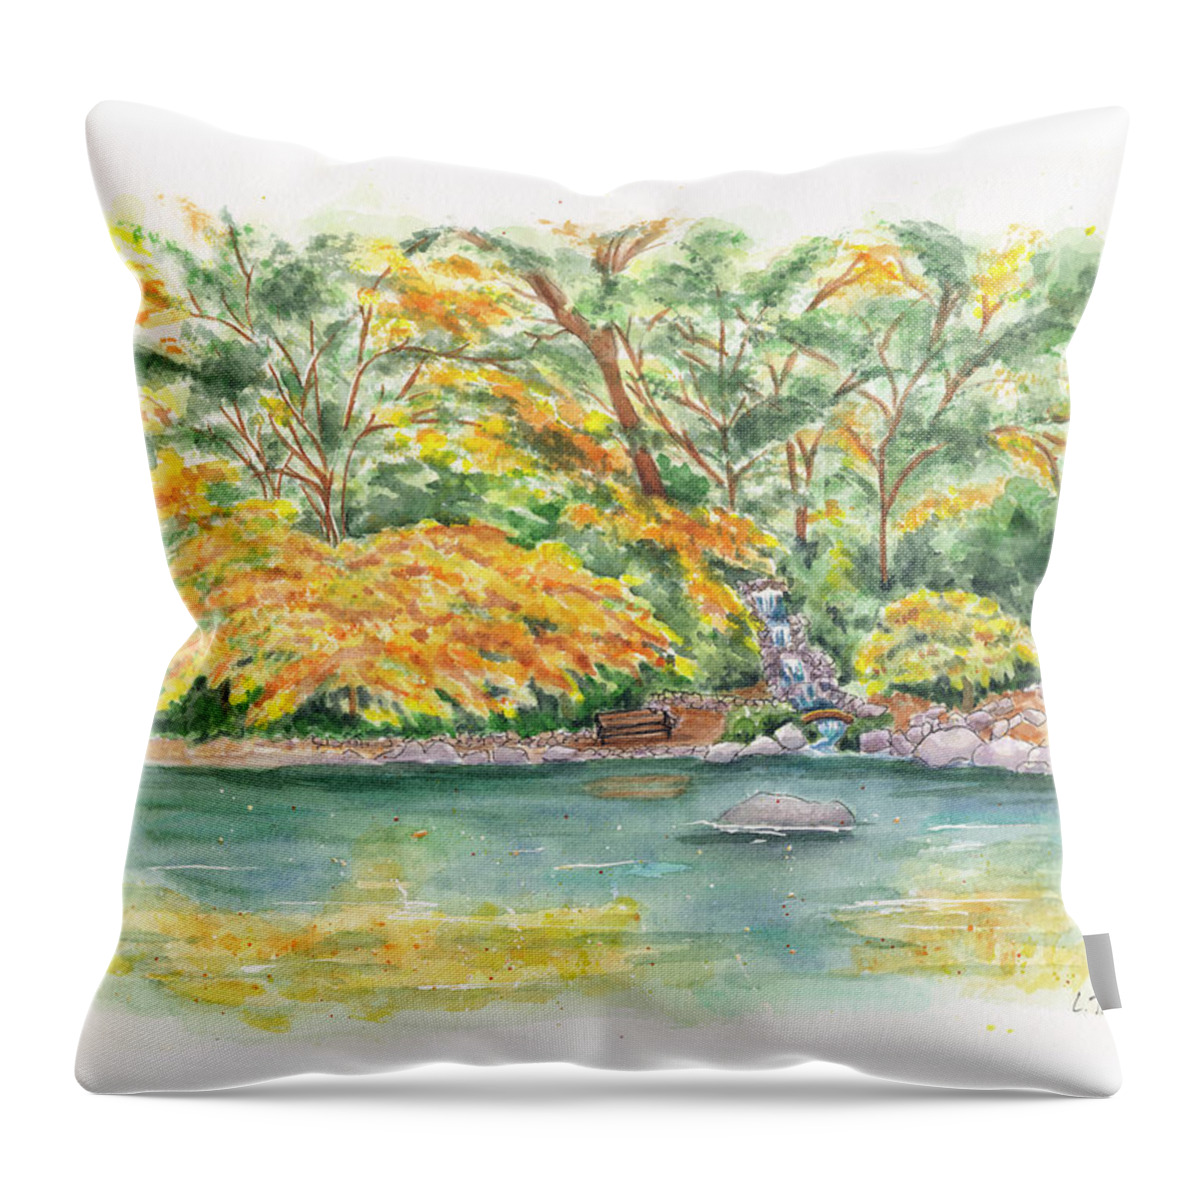 Lithia Park Throw Pillow featuring the painting Lithia Park Reflections by Lori Taylor